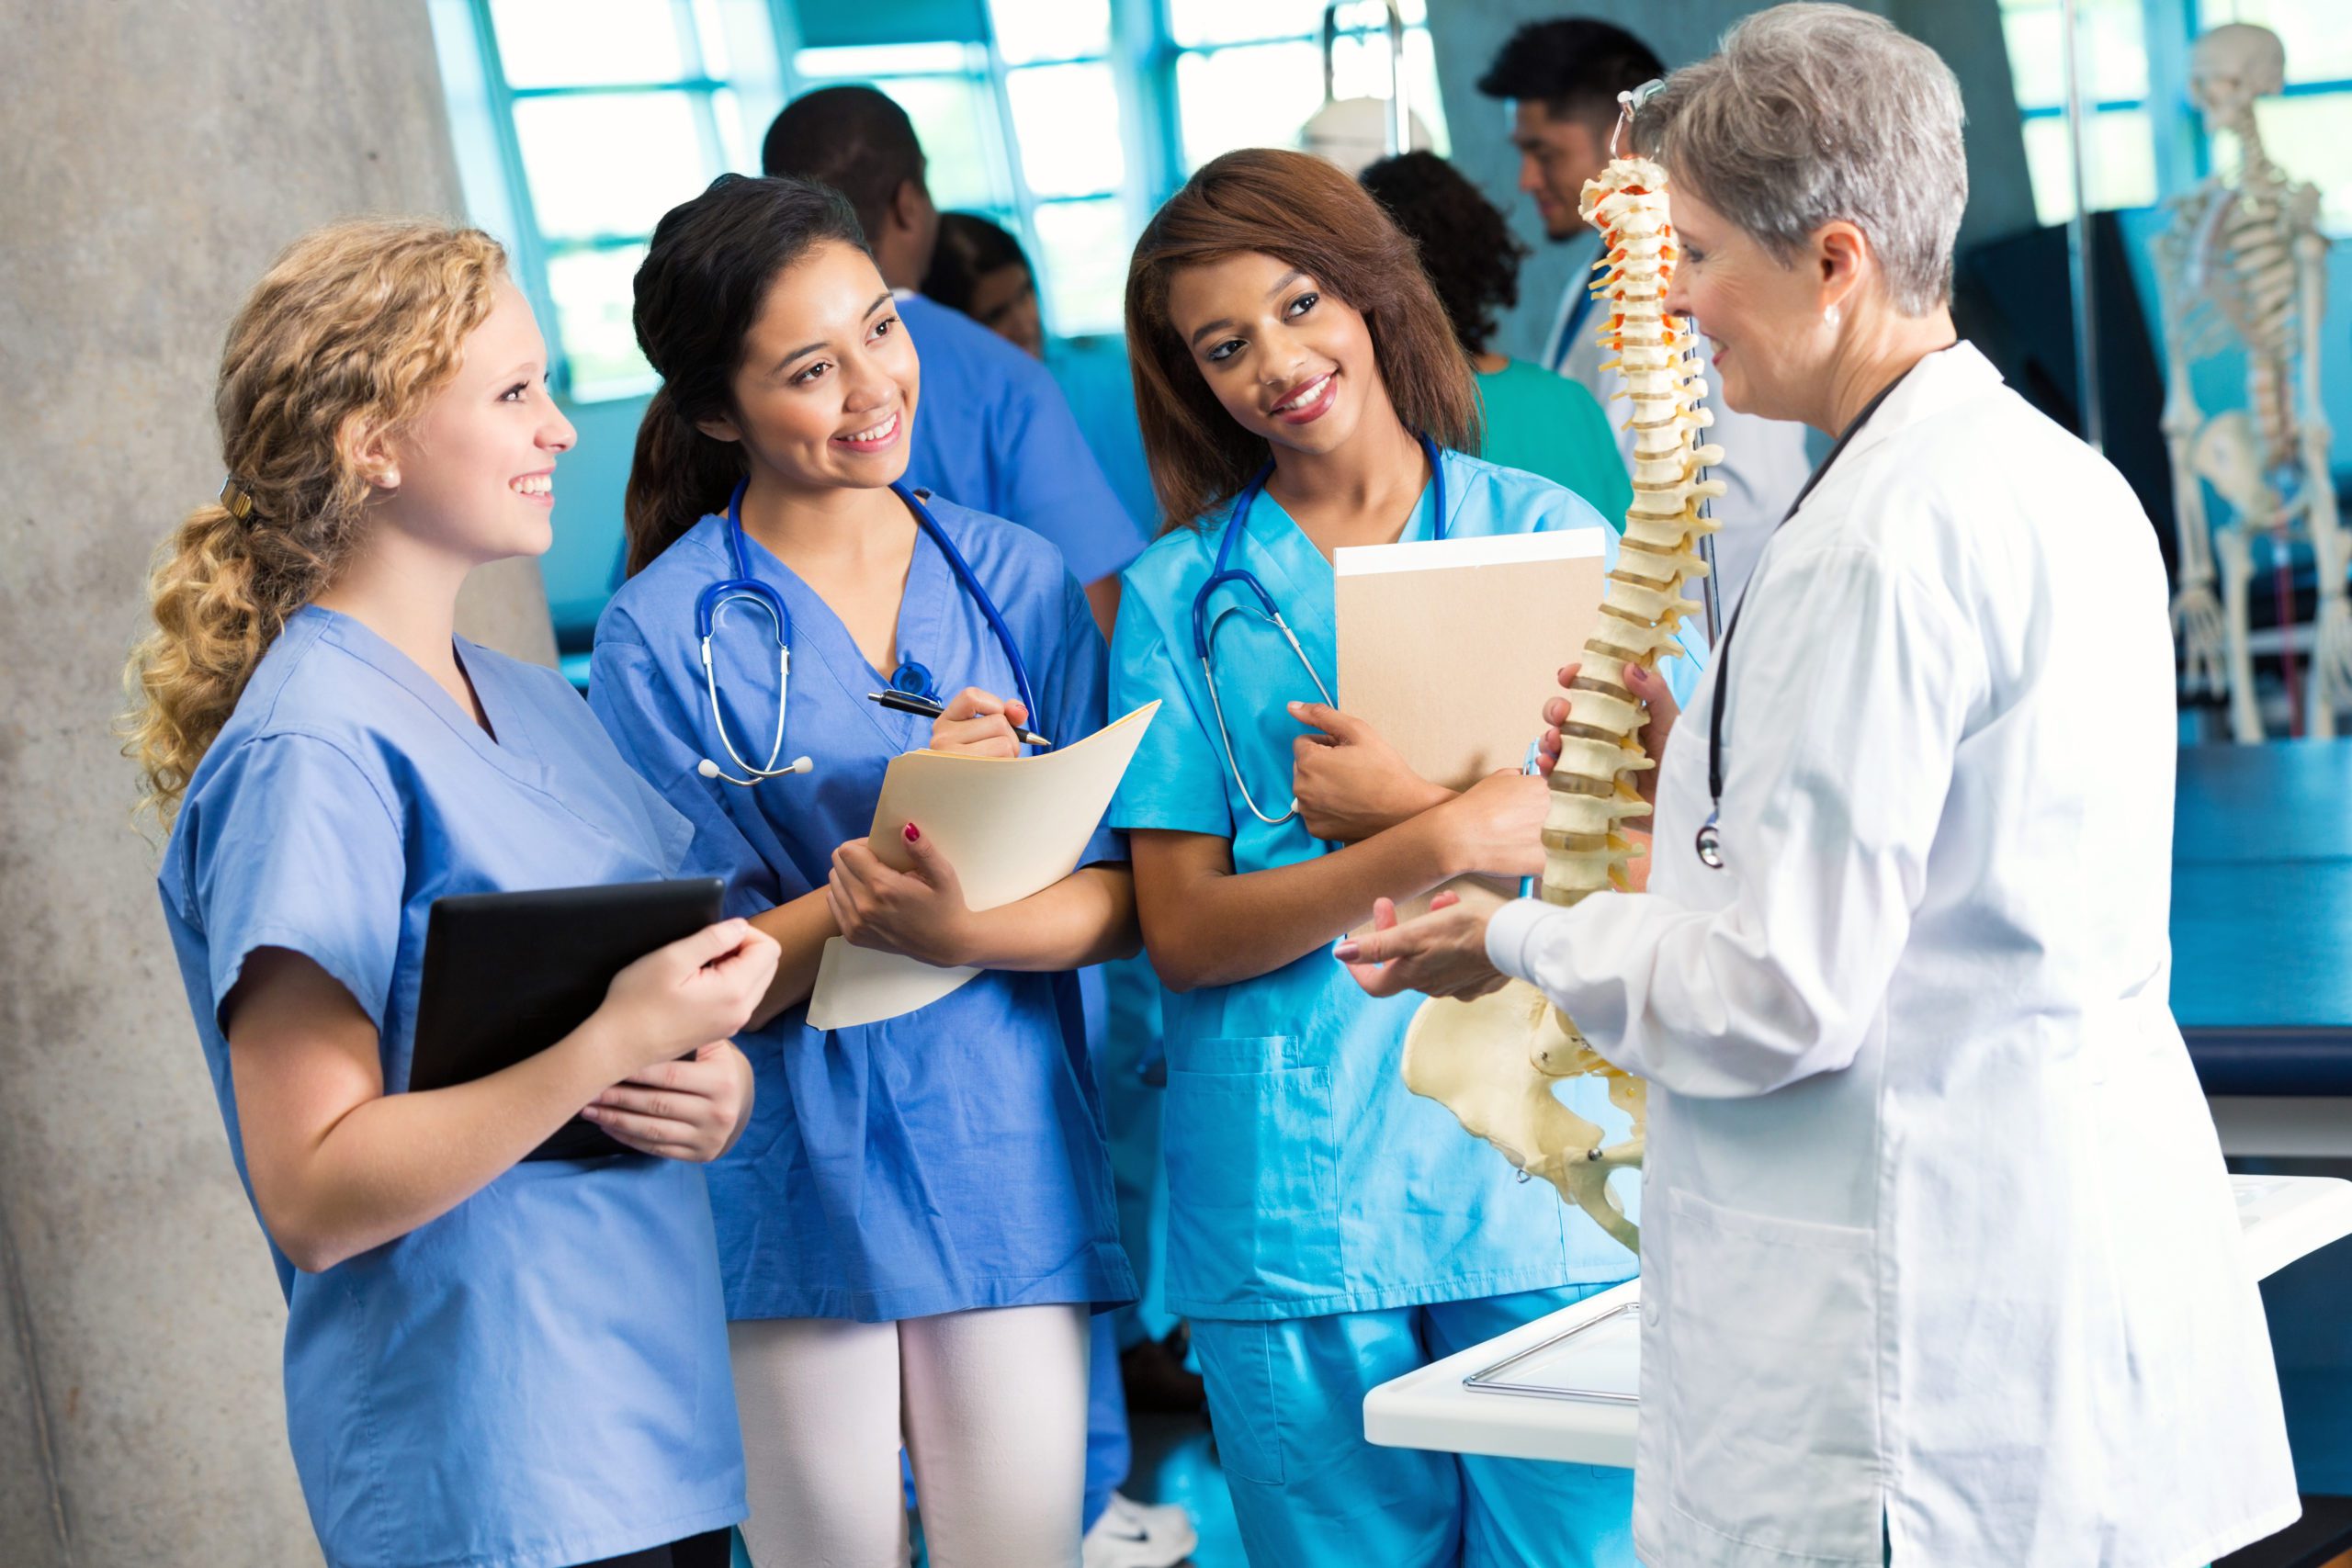 Senior Caucasian medical school professor or doctor uses a model of the human spine to teach a group of medical or nursing students. The students take notes as the professor talks about the spine. The students are wearing scrubs and the doctor is wearing a lab coat.